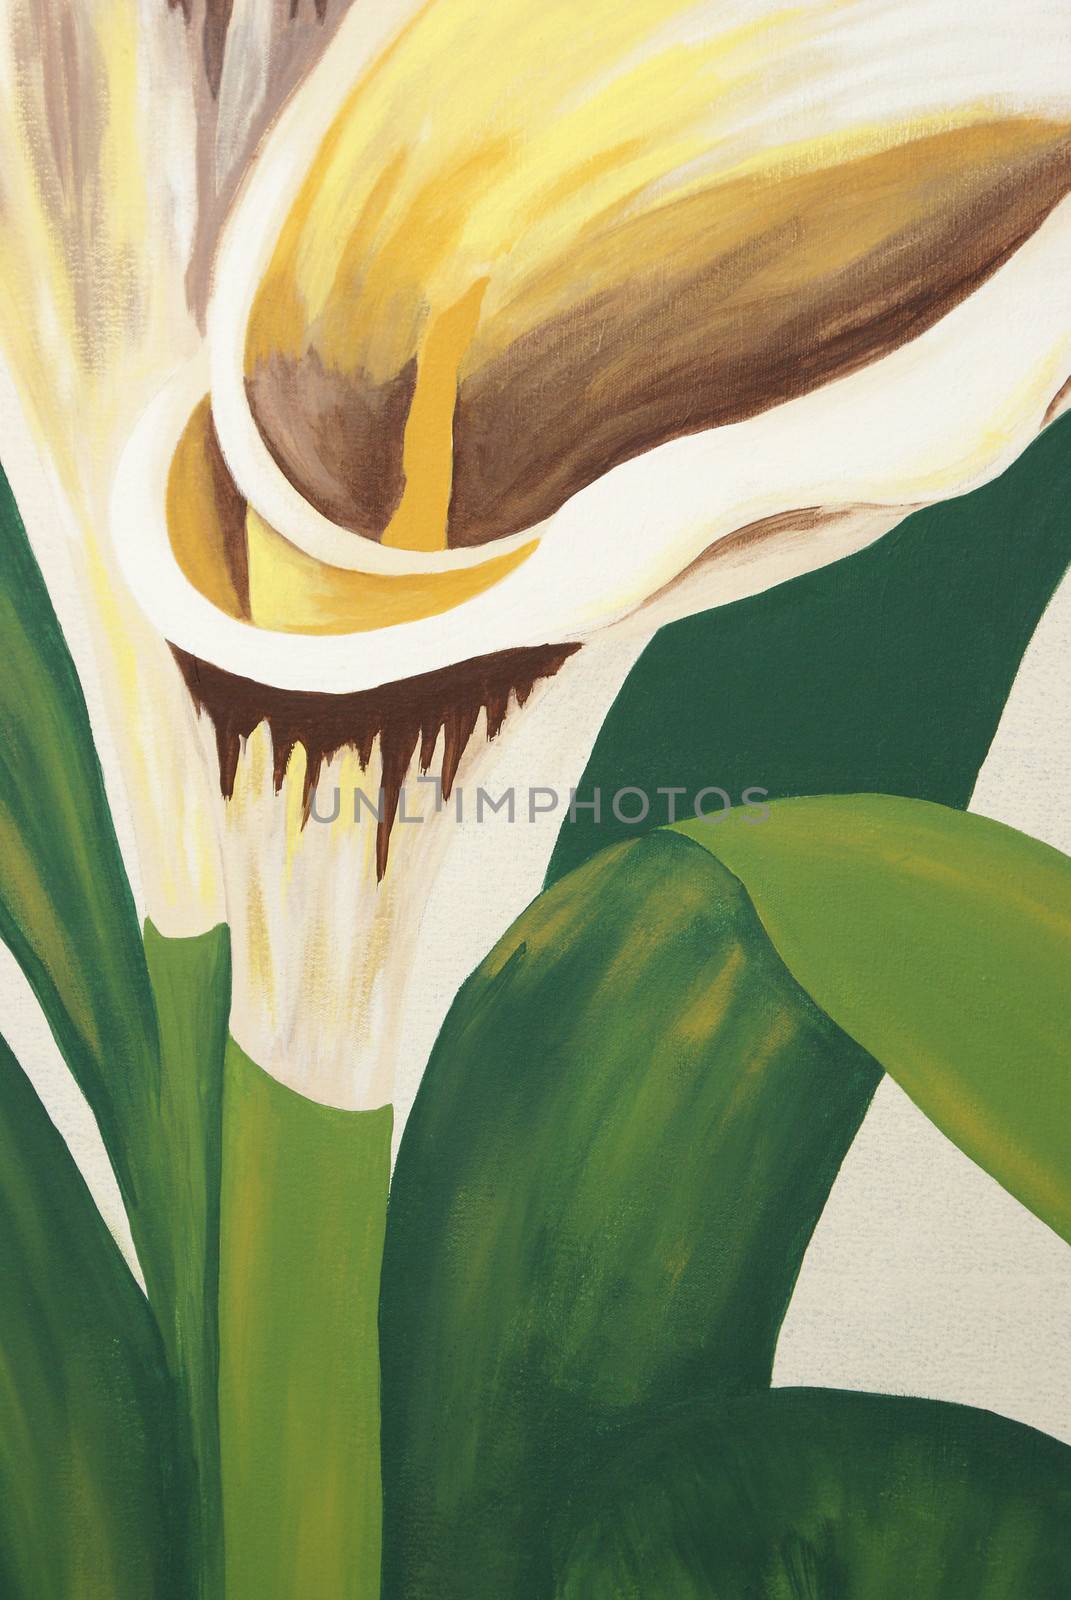 A painting of calla lilies on a canvas. Property Release on file.